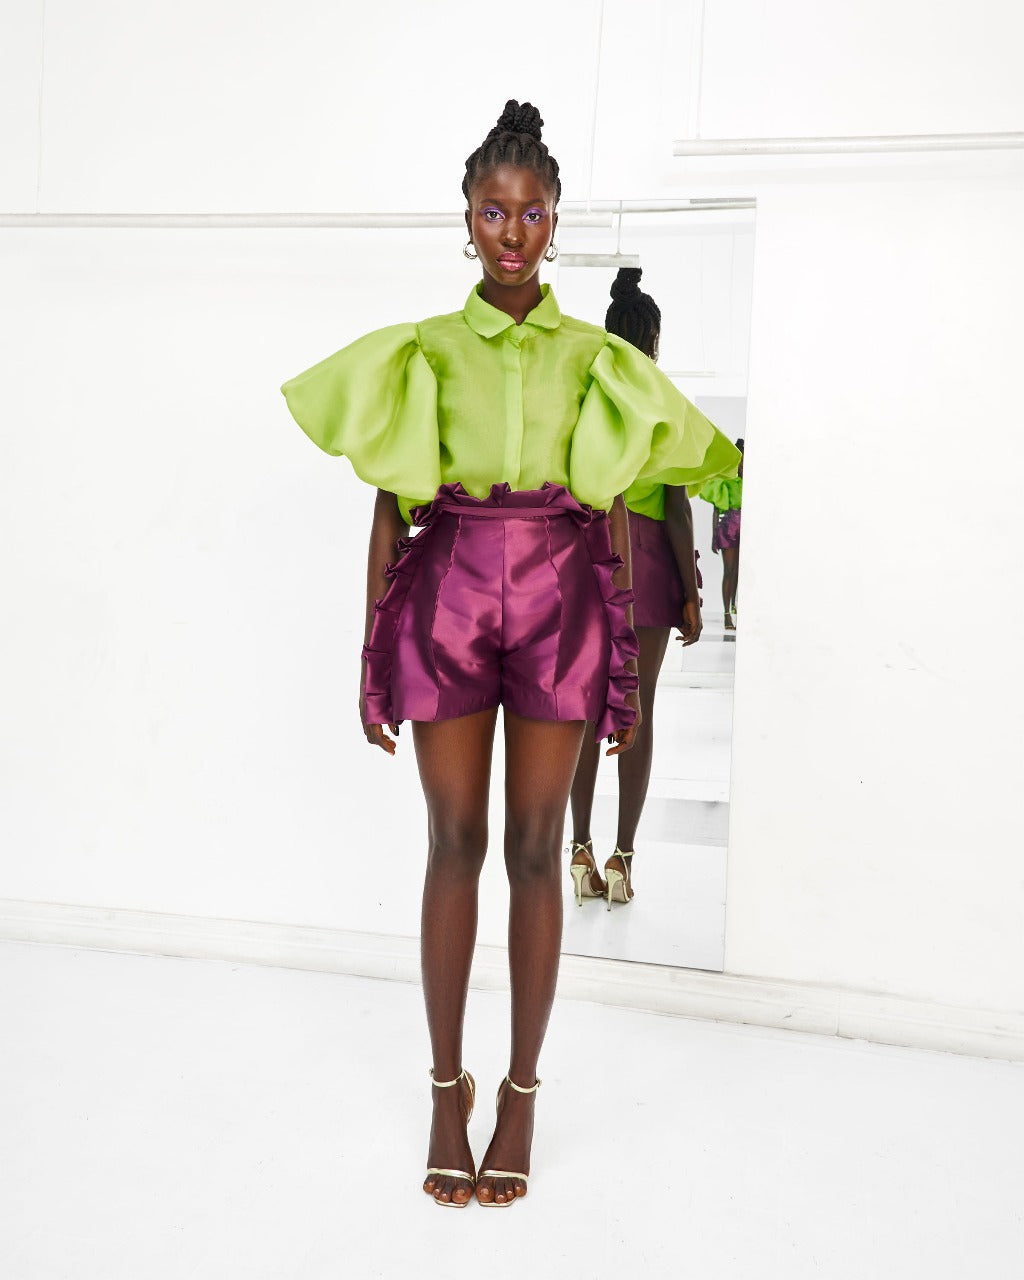 A model wearing a Chartreuse top and Aubergine colored shorts with ruffles in a white room